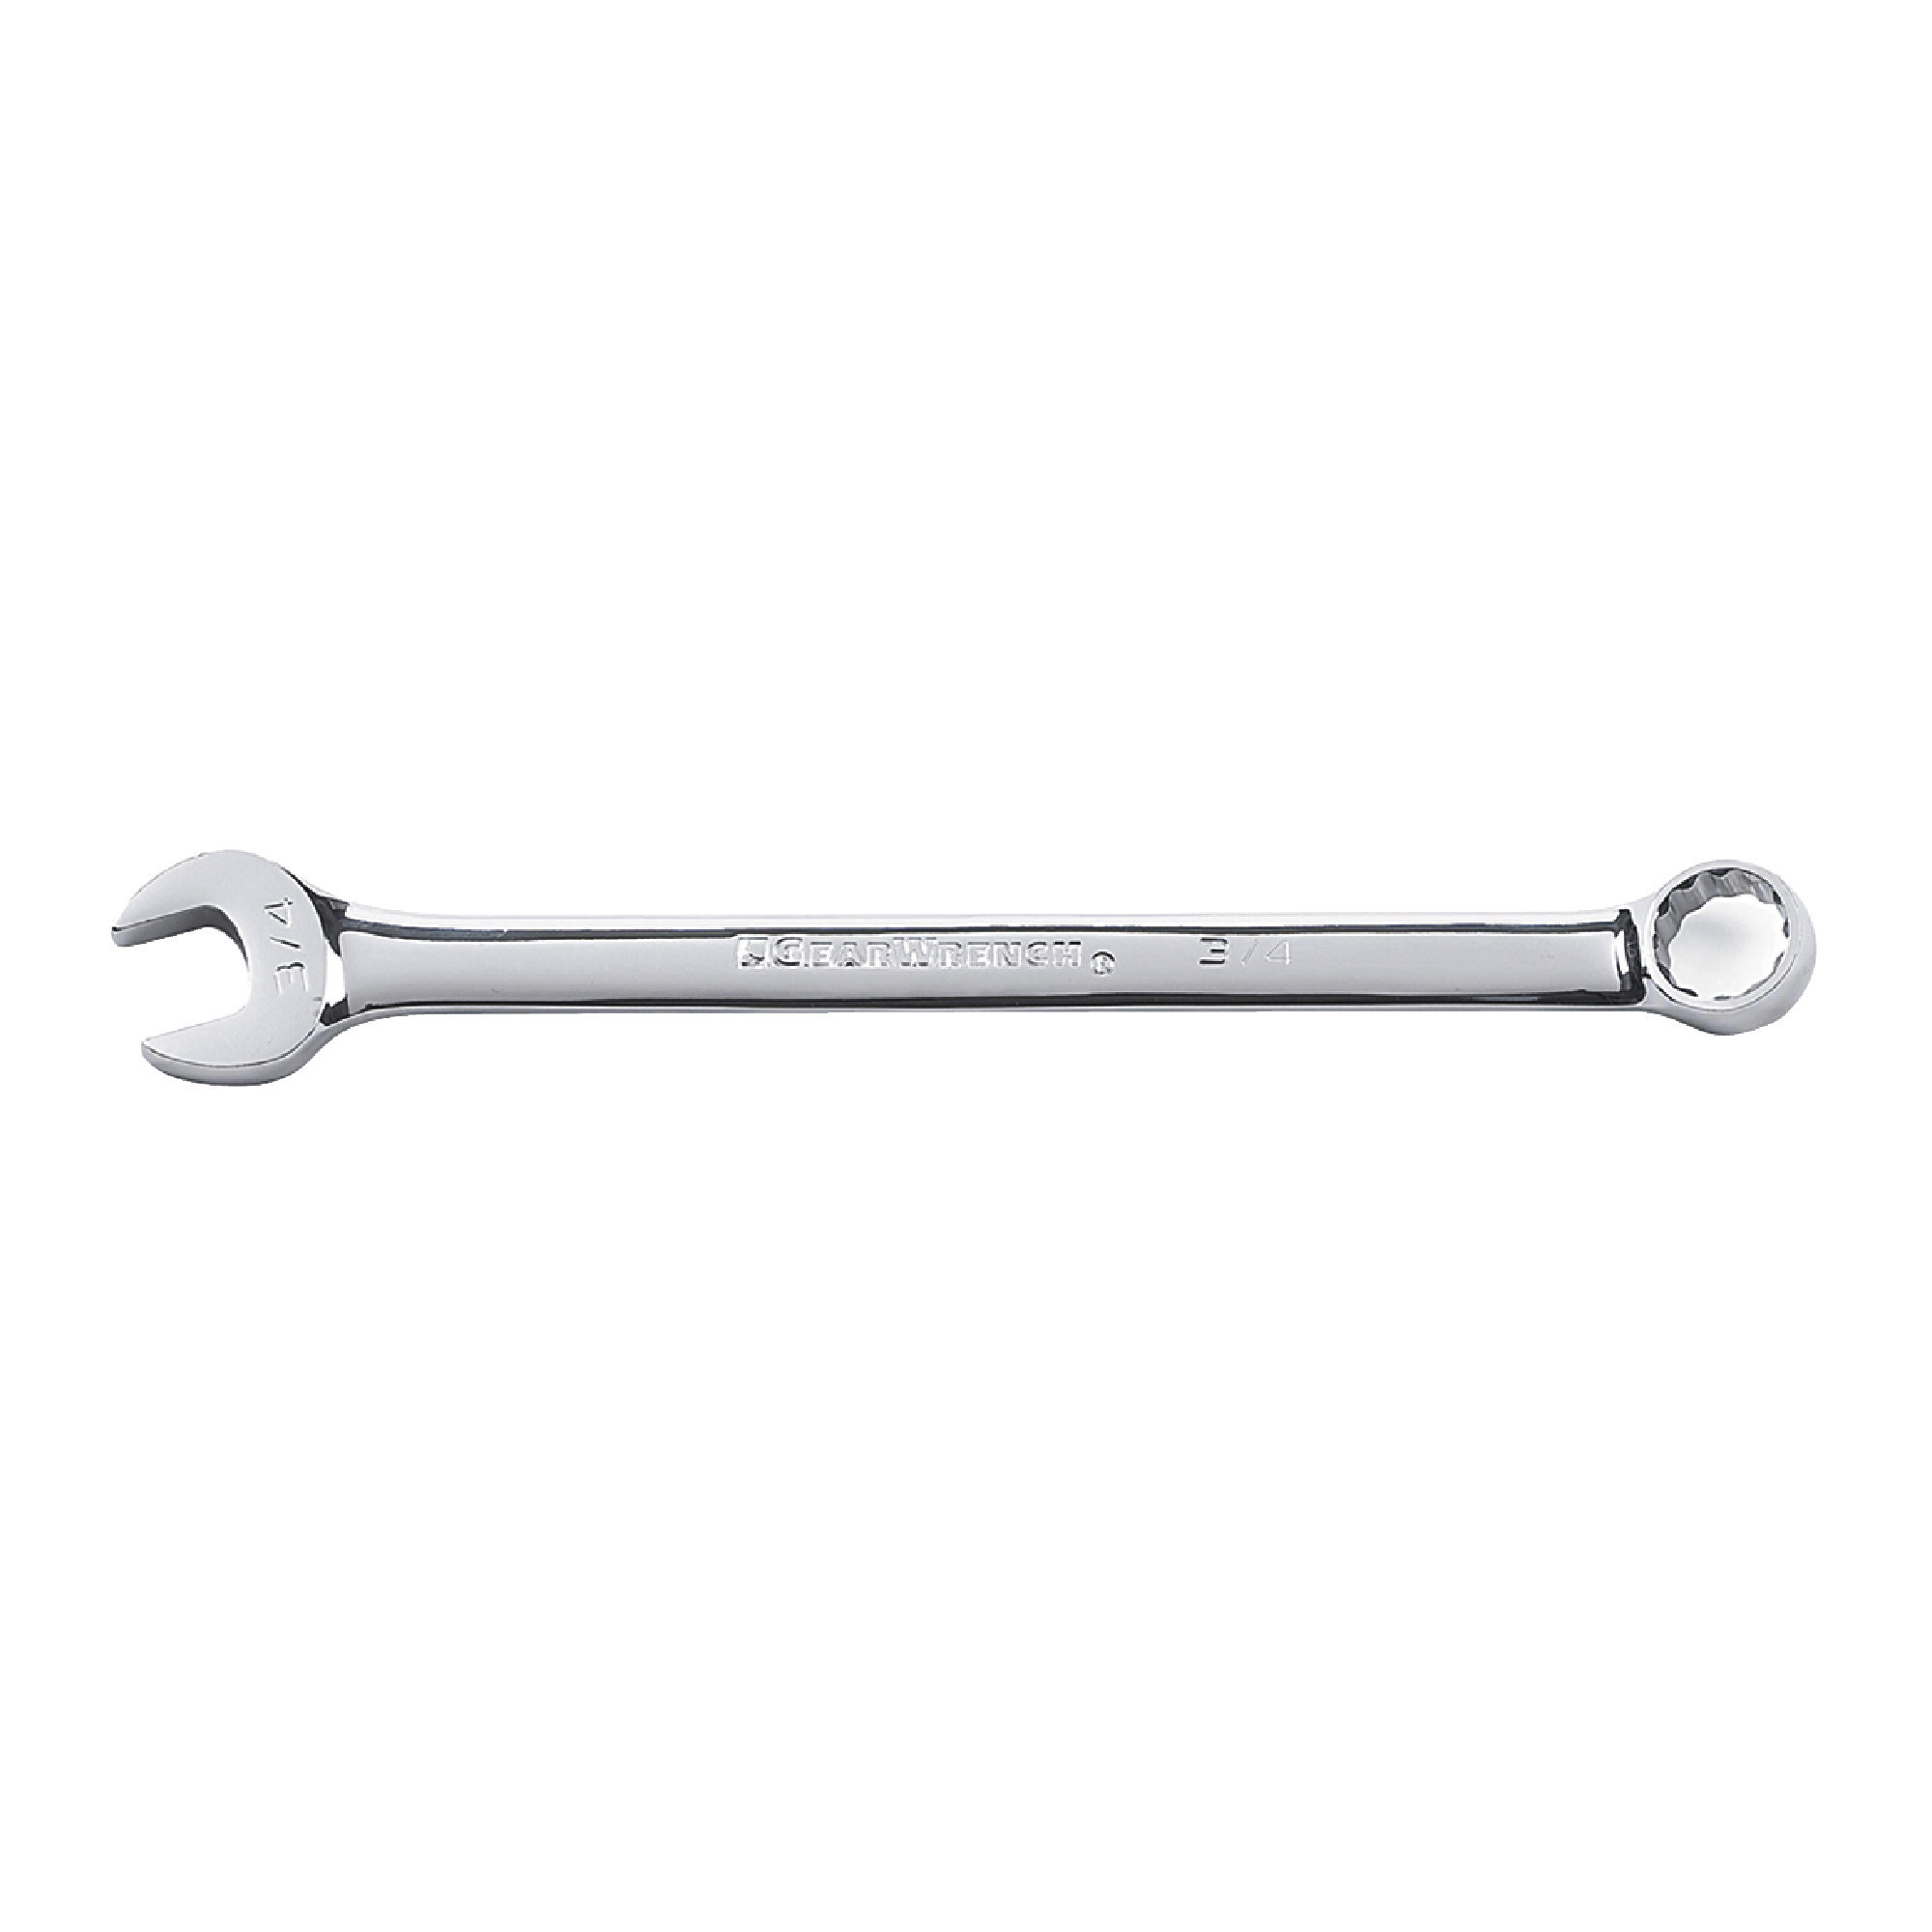 20mm 12 Point Long Pattern Combination Wrench